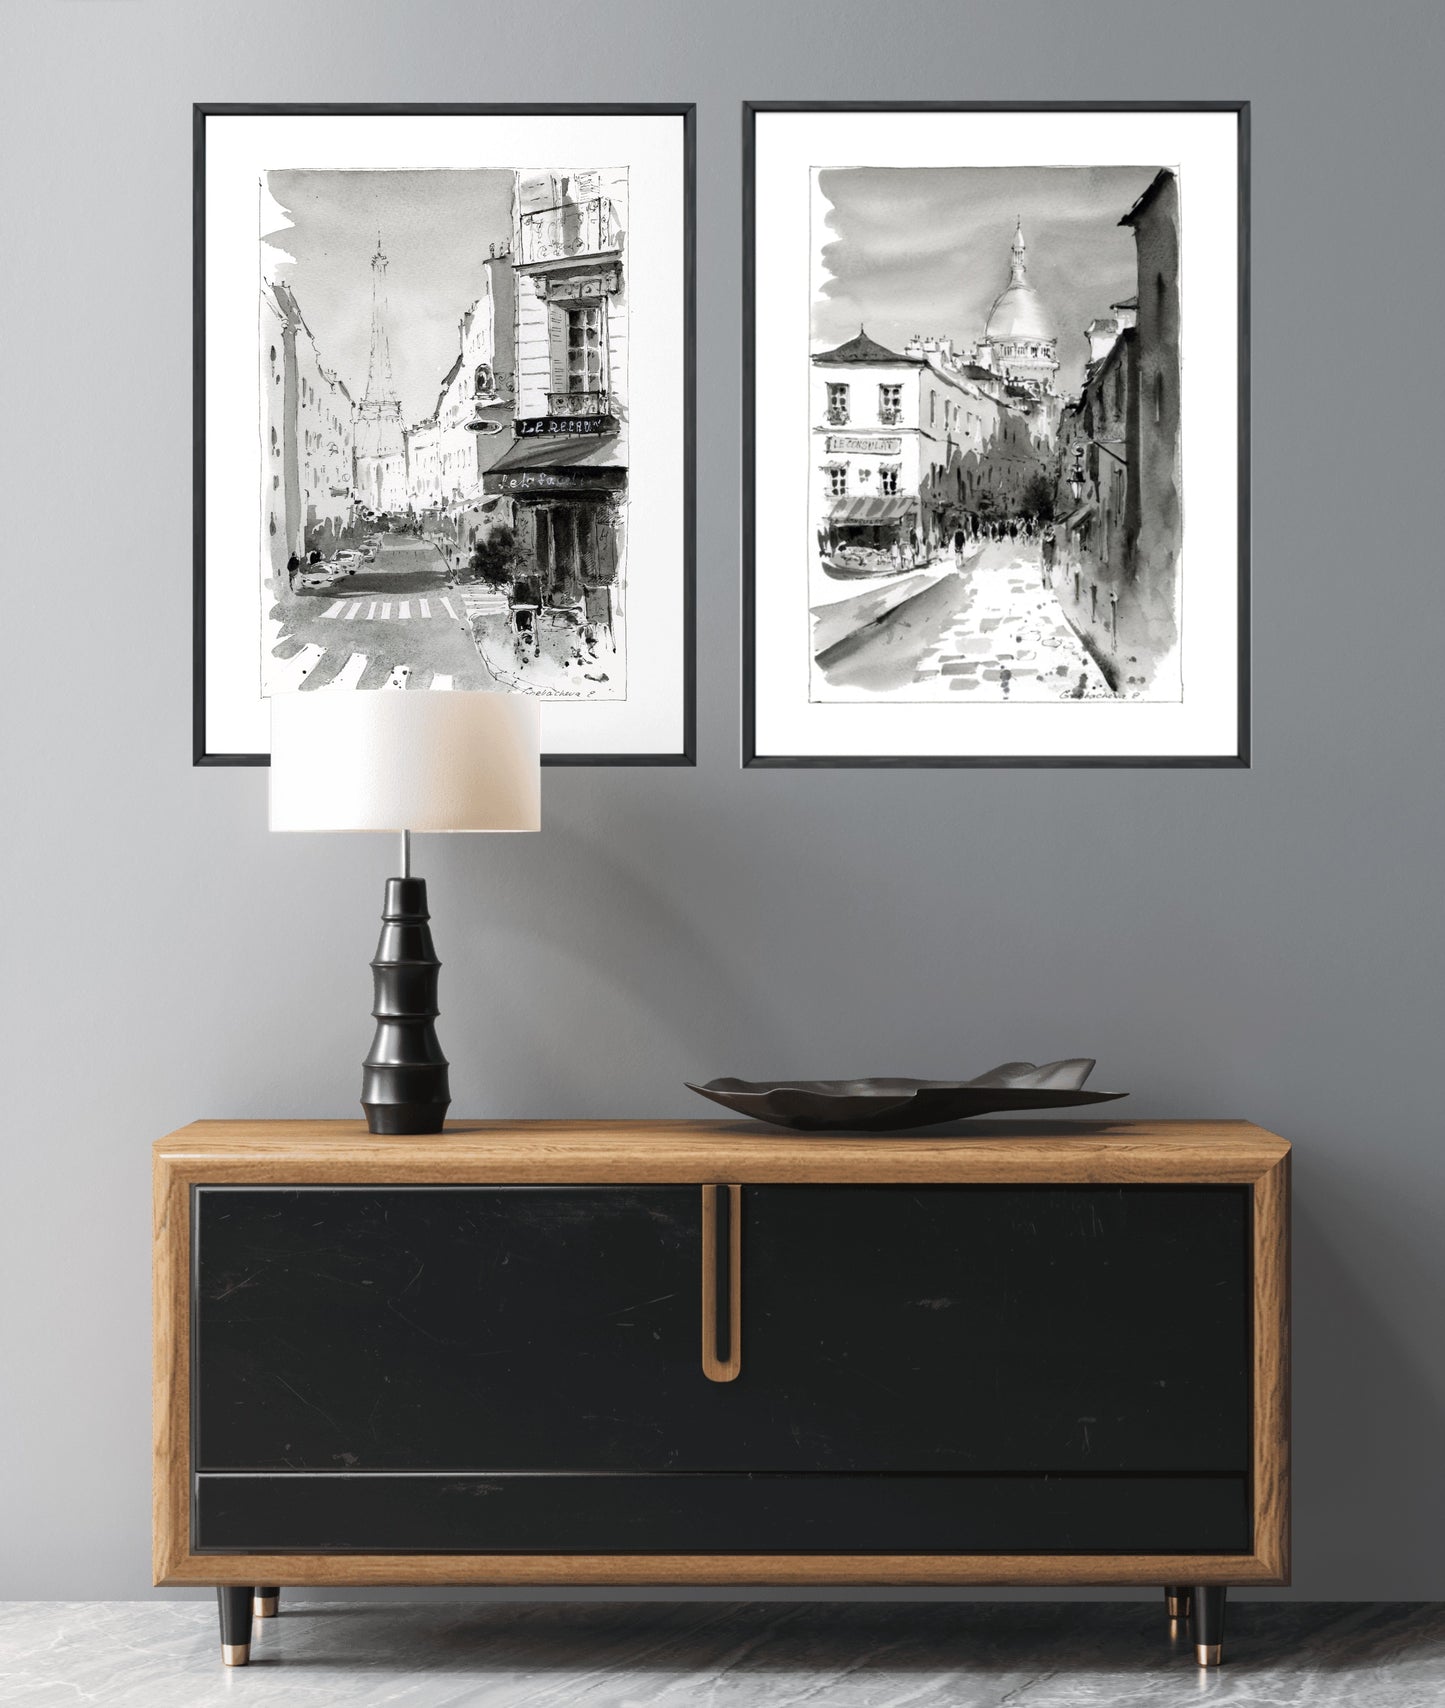 Montmartre Art Set of 2, Black and White Paris Street Prints, Eiffel Tower Wall Decor, French Chic Home Artwork